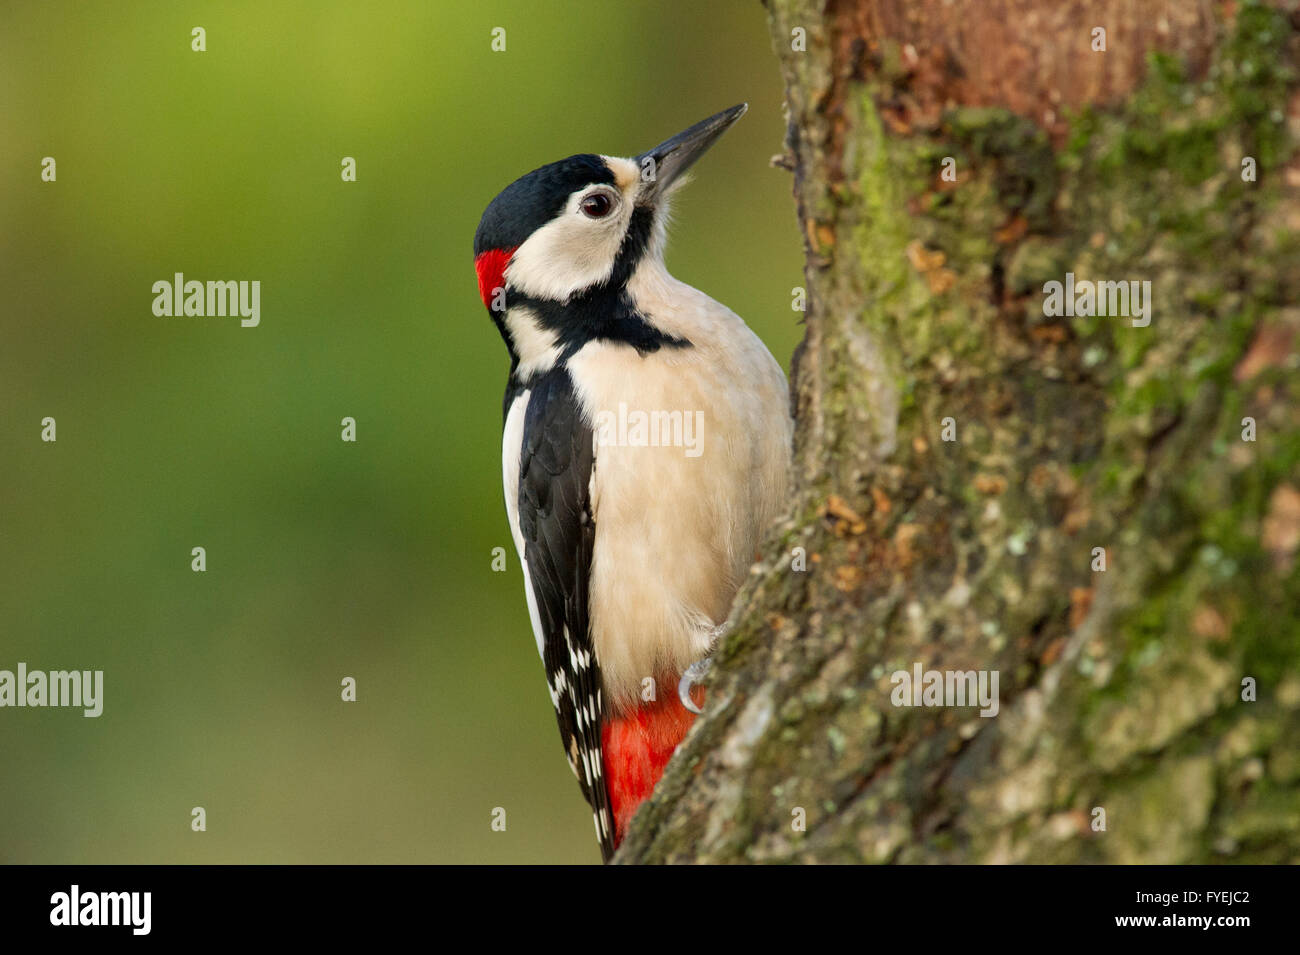 A Great Spotted Woodpecker (Dendrocopos major) clings to an old tree stump Stock Photo